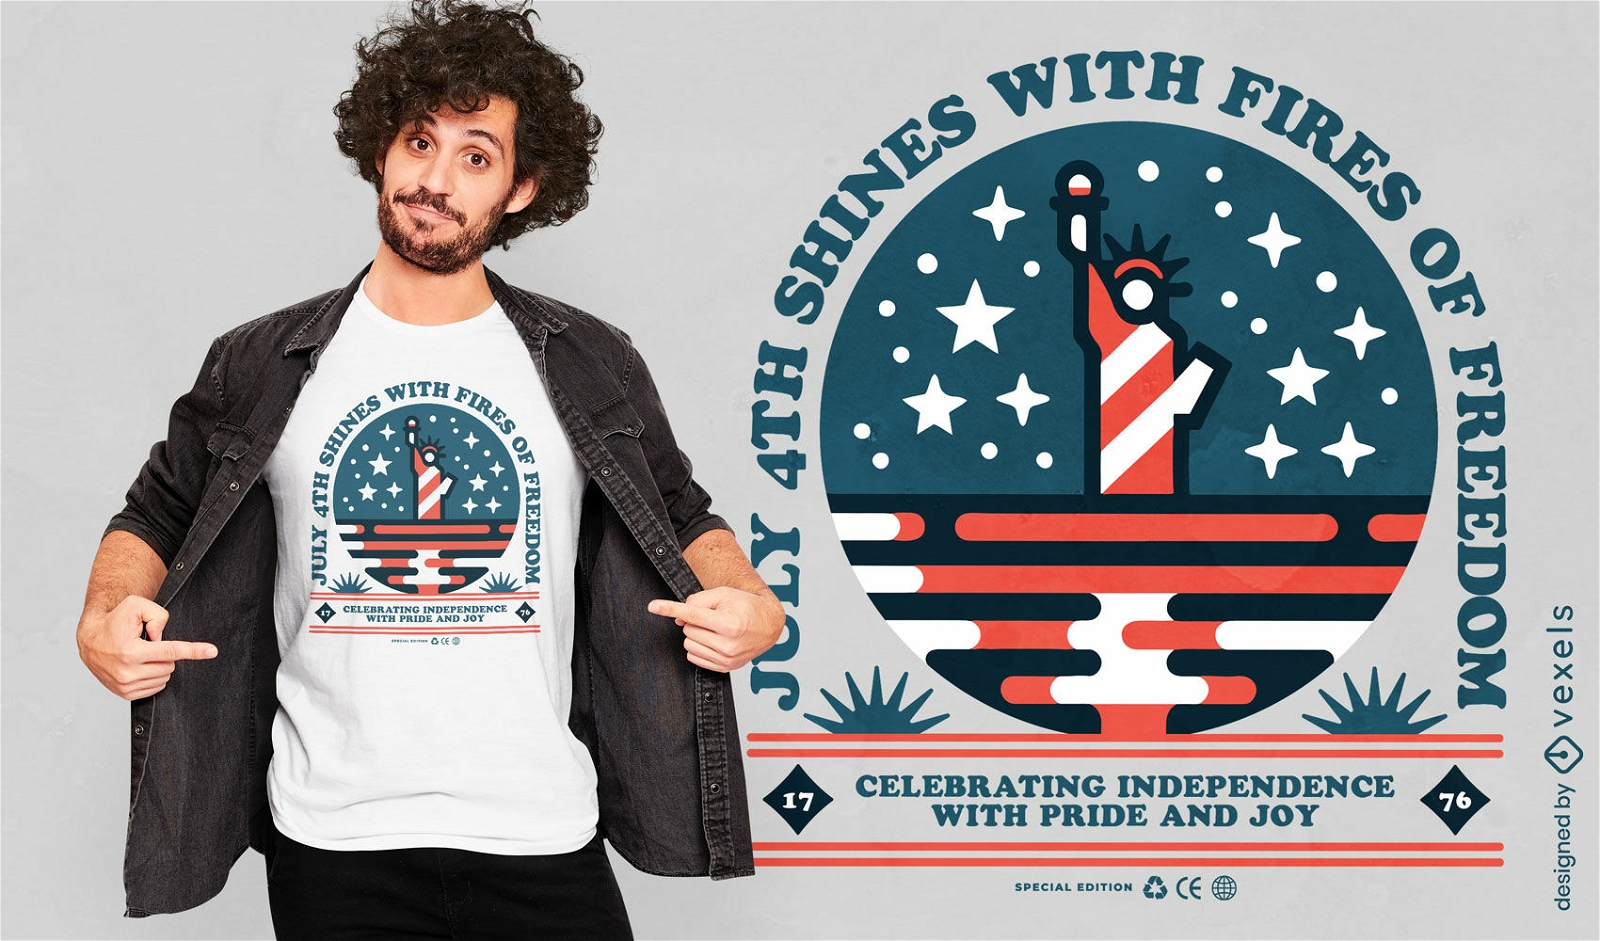 July 4th shines with fires of freedom t-shirt design